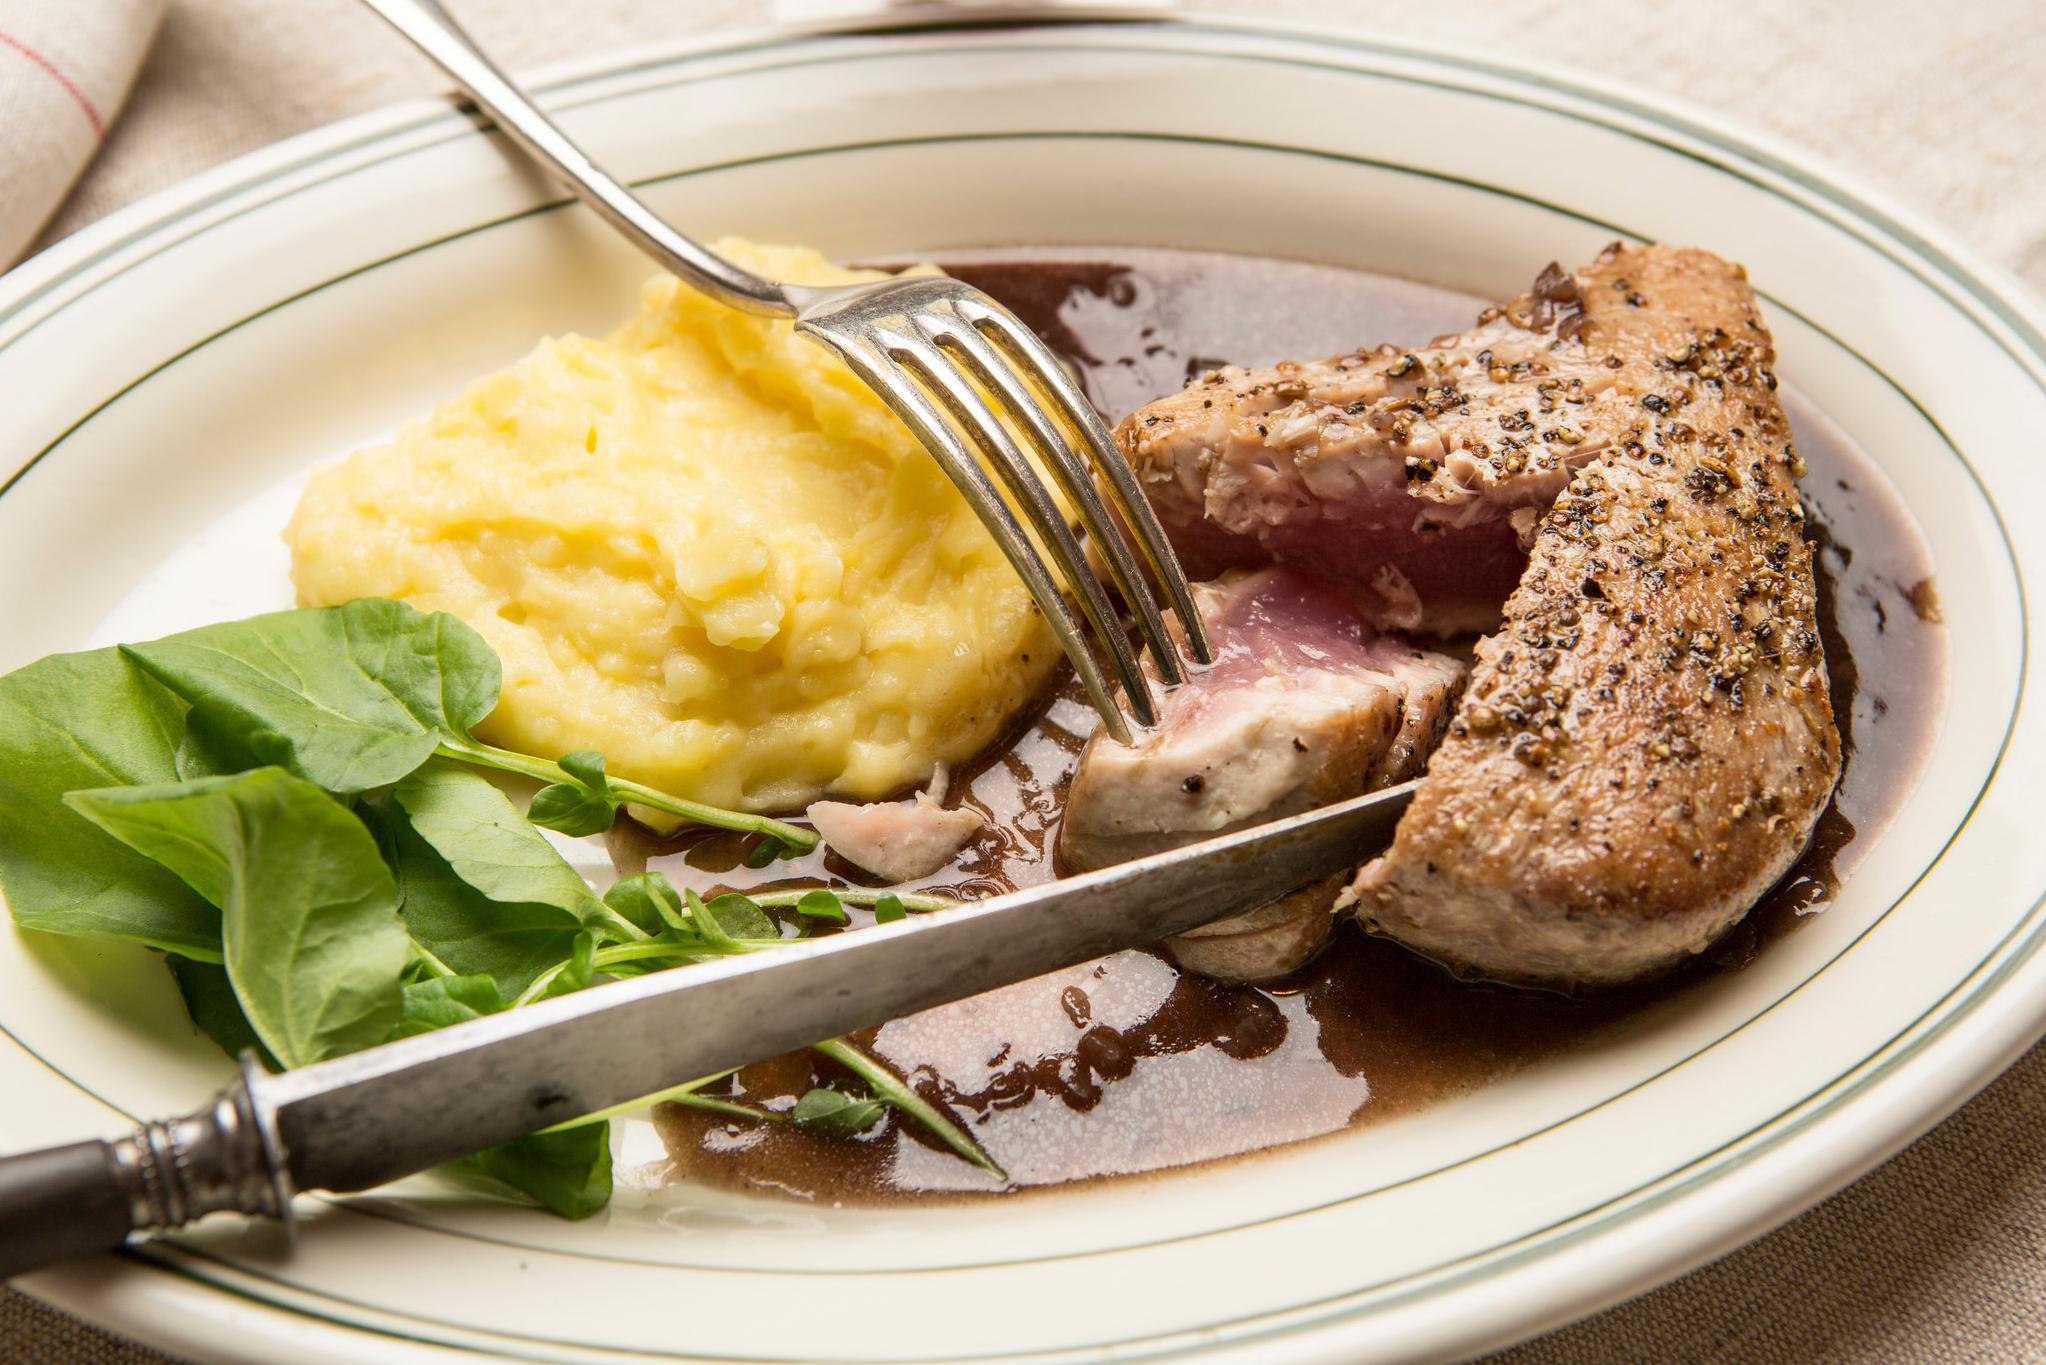  Seafood lovers, this red wine vinaigrette tuna steaks recipe is perfect for you!